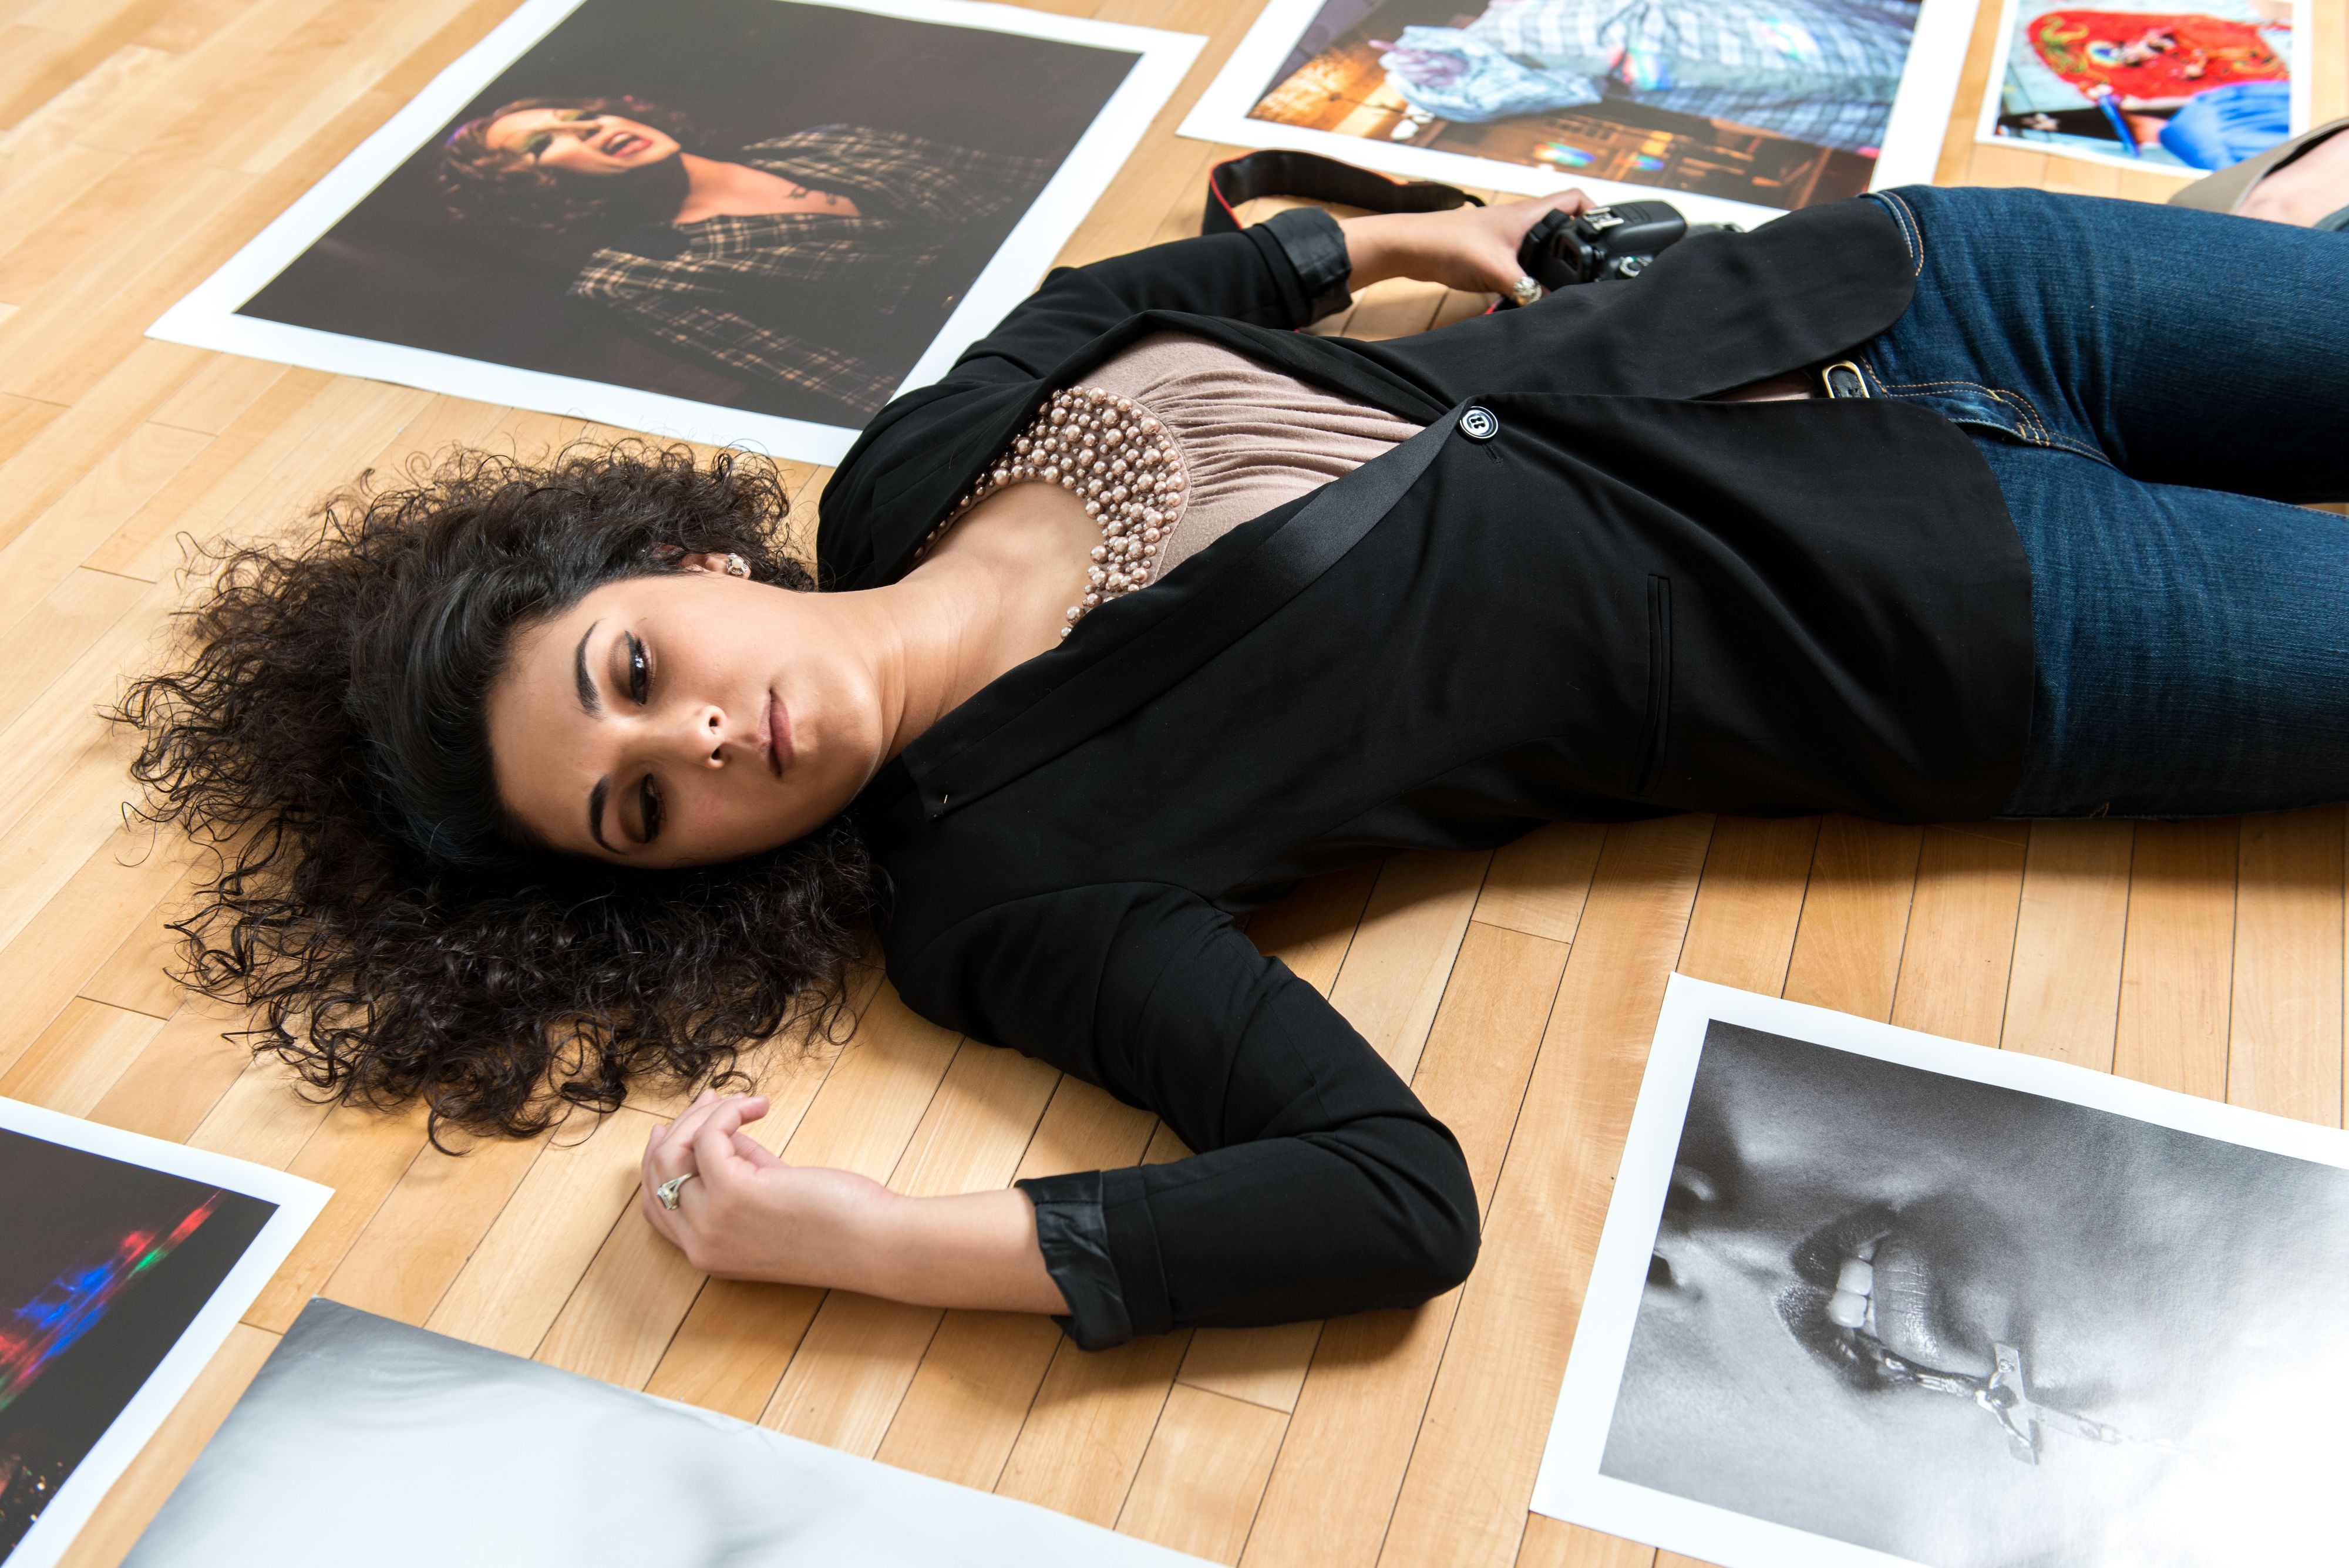 Female photography student lying on back surrounded by her images